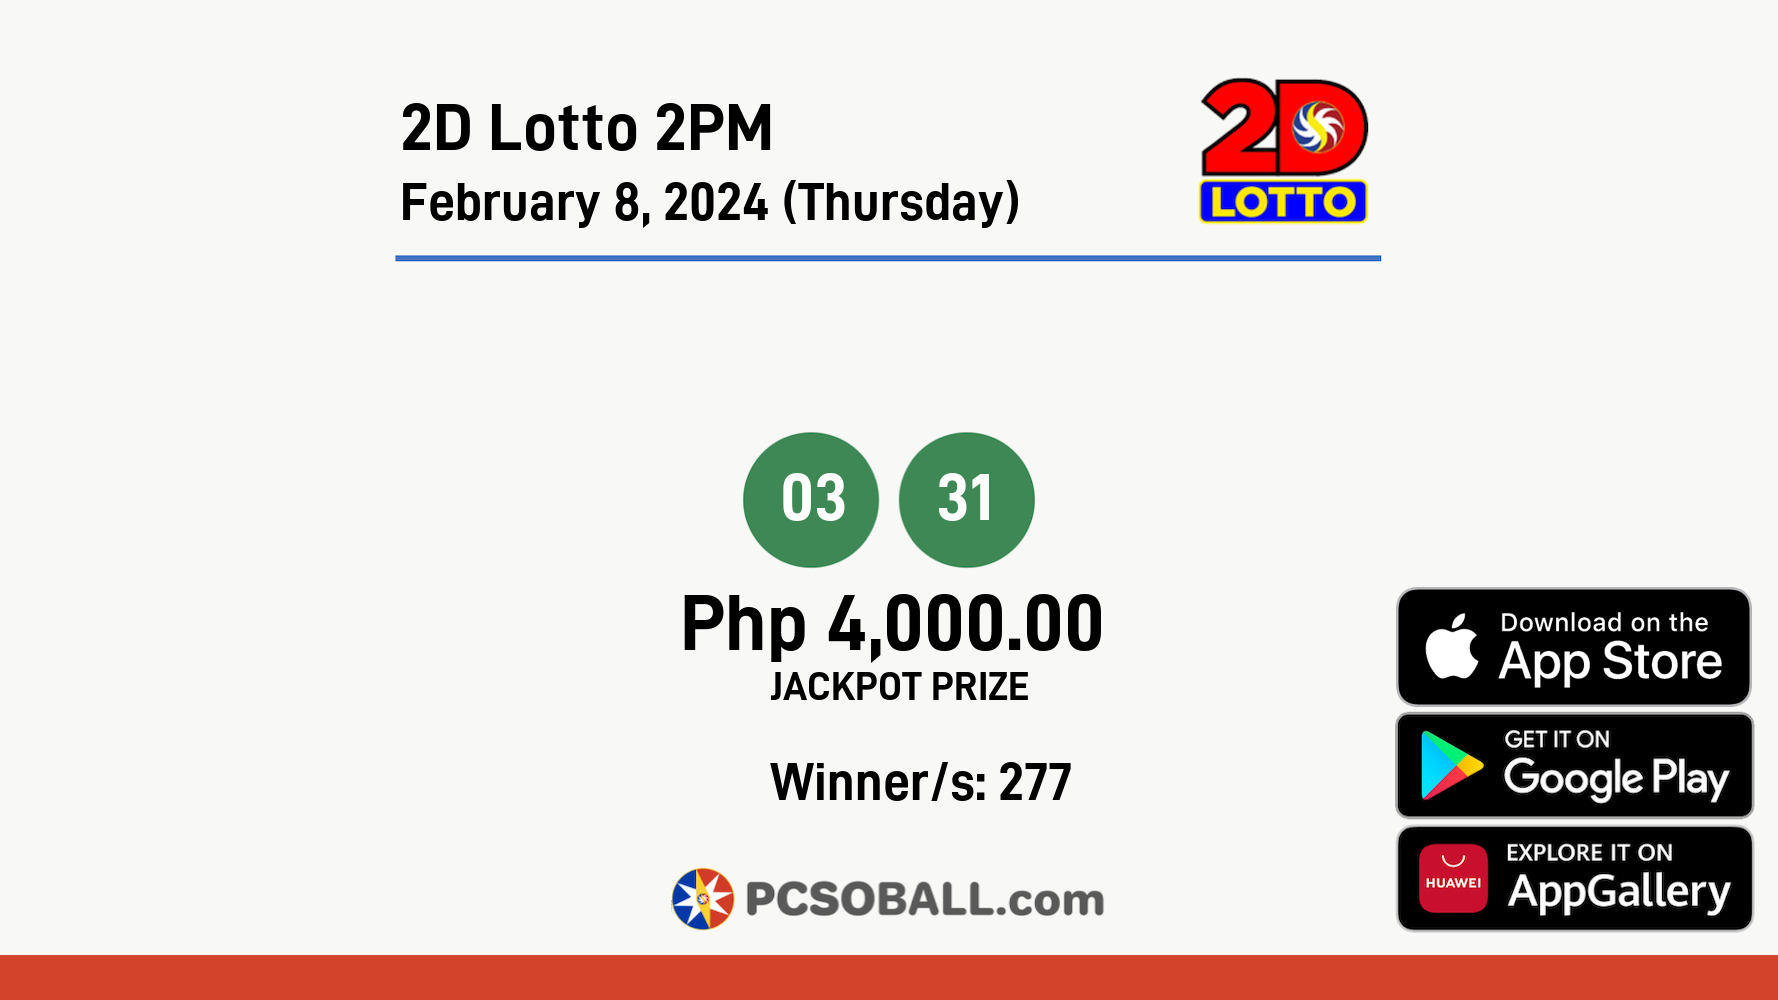 2D Lotto 2PM February 8, 2024 (Thursday) Result